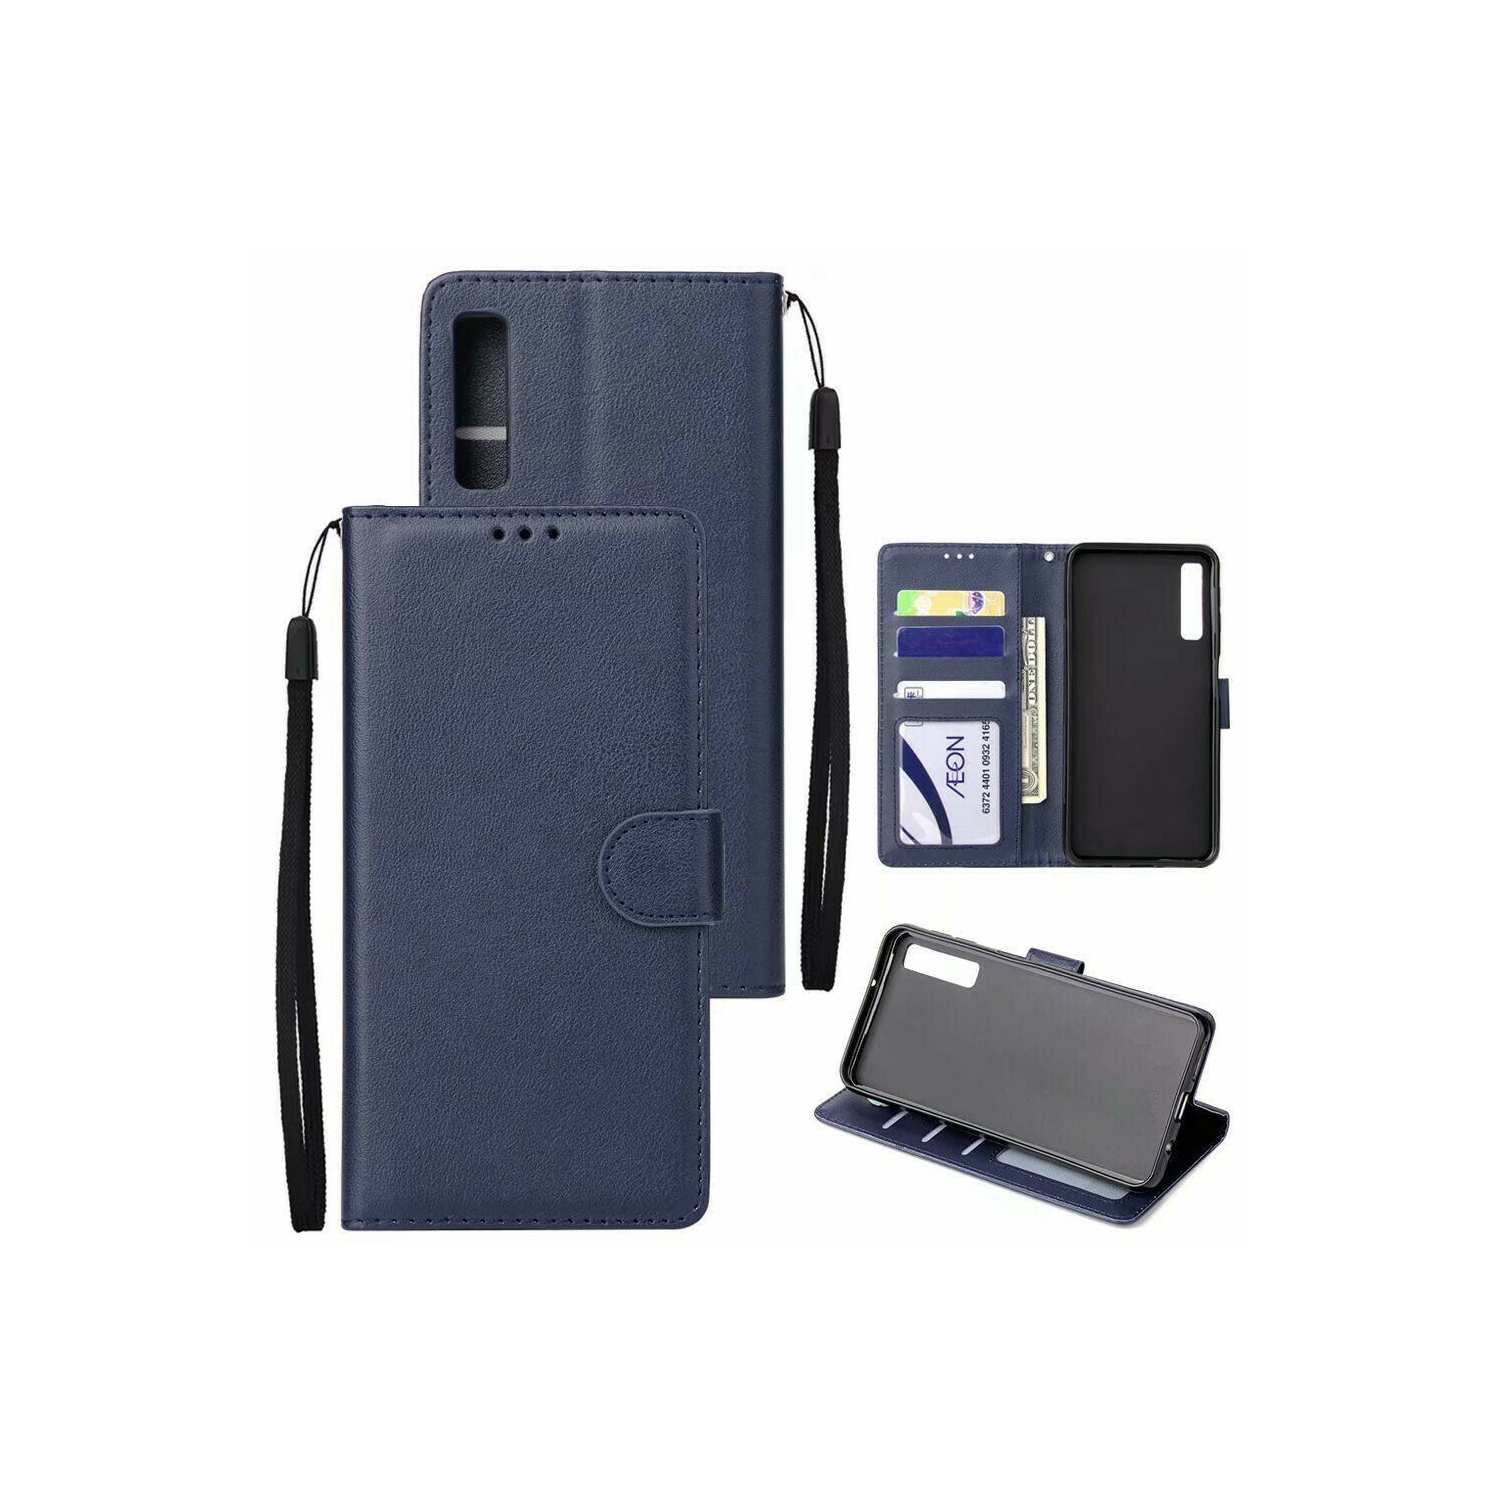 【CSmart】 Magnetic Card Slot Leather Folio Wallet Flip Case Cover for Samsung A50 / A50s / A30s, Navy